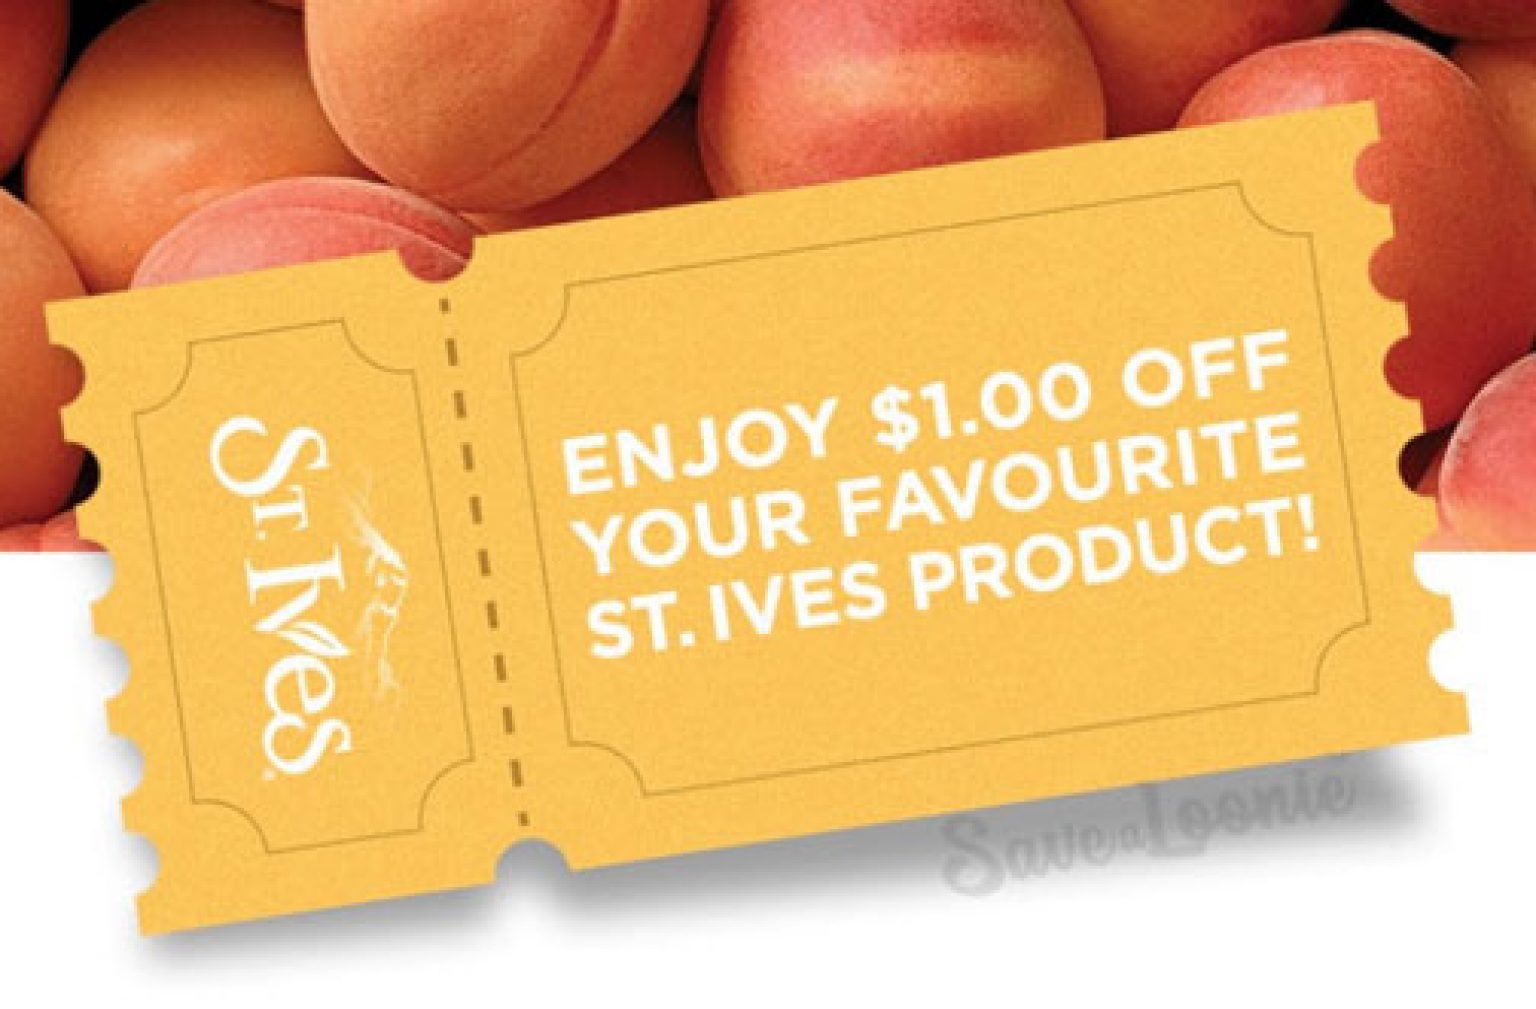 St. Ives Coupon Canada — Deals from SaveaLoonie!